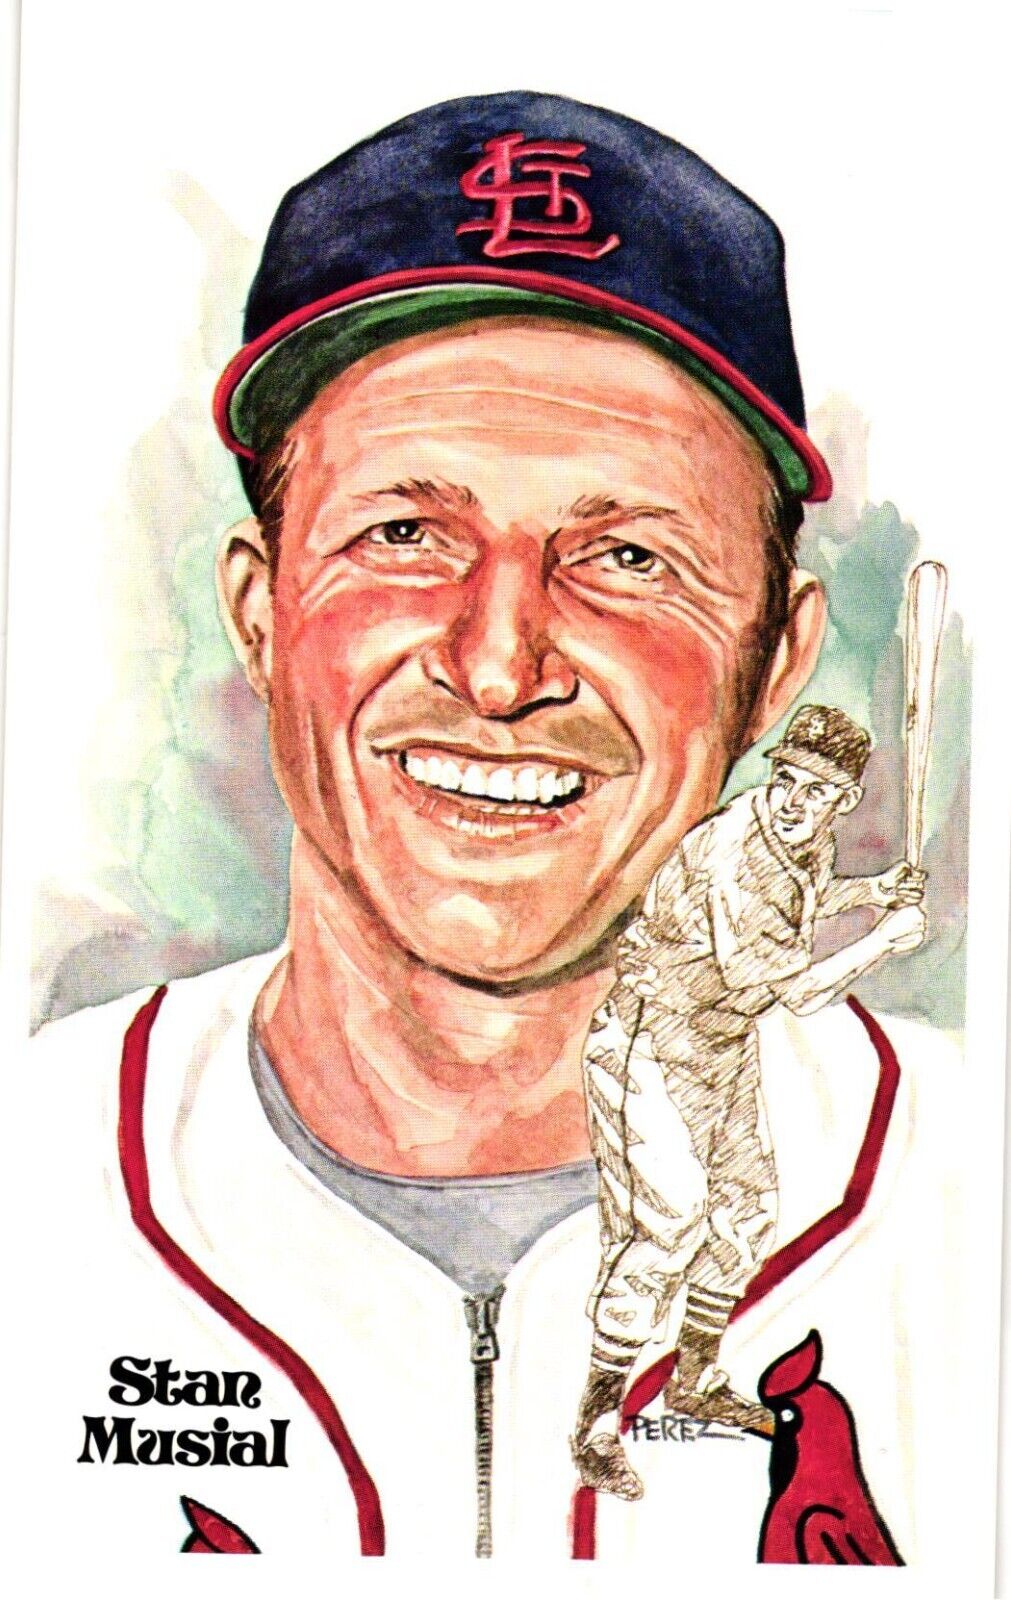 Stan Musial 1980 Perez-Steele Baseball Hall of Fame Limited Edition Postcard